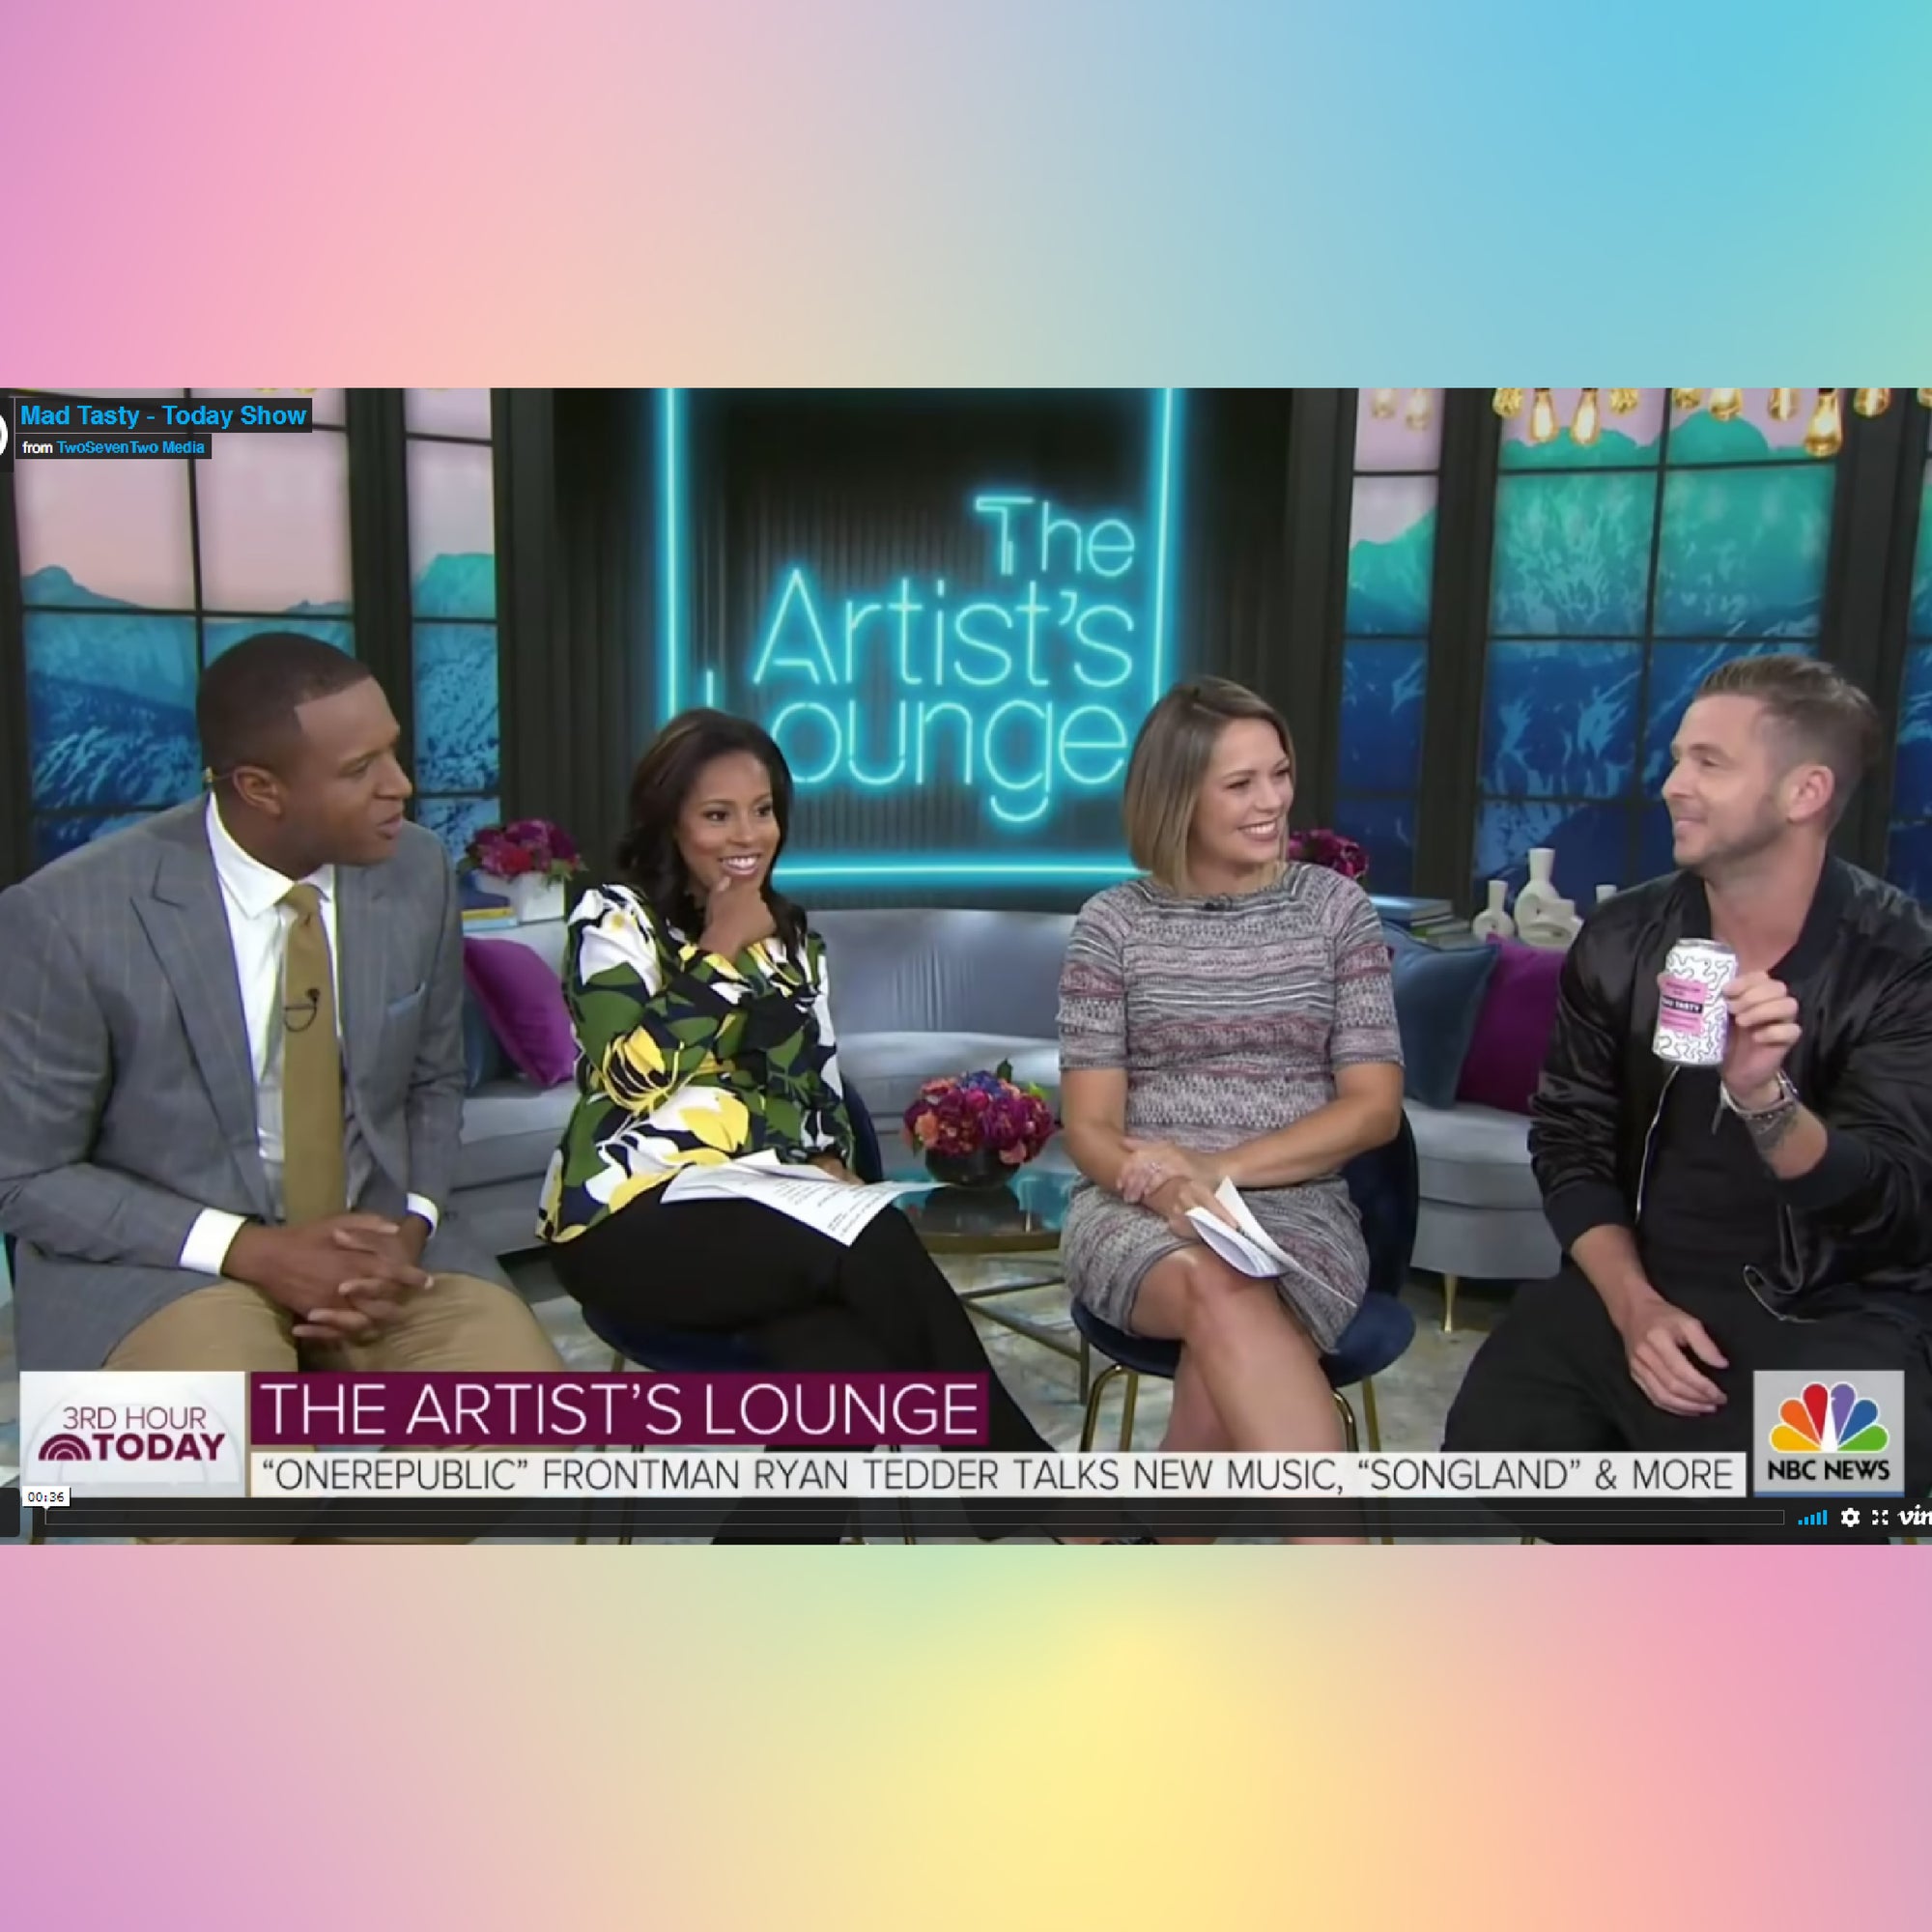 "ONEREPUBLIC" FRONTMAN TALKS NEW MUSIC AT THE TODAY SHOW - MAD TASTY